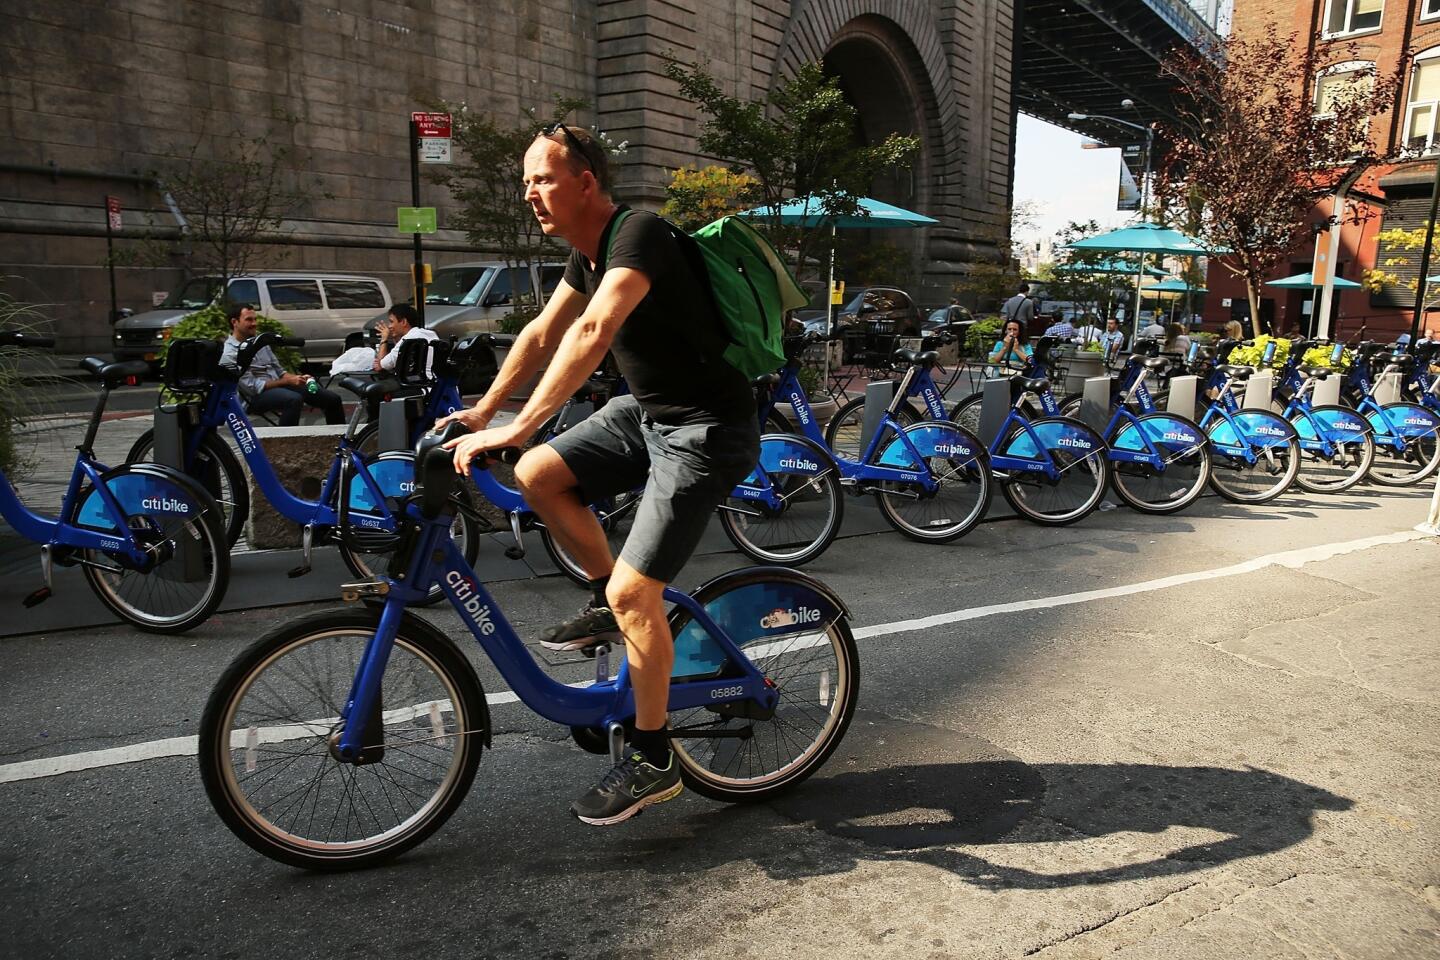 A man rides a shared bike rented through the Citi Bike program in Brooklyn, N.Y., on Oct. 4. The program was beset by mechanical problems and overwhelmed by demand when it launched in May, but it has apparently righted itself since then.